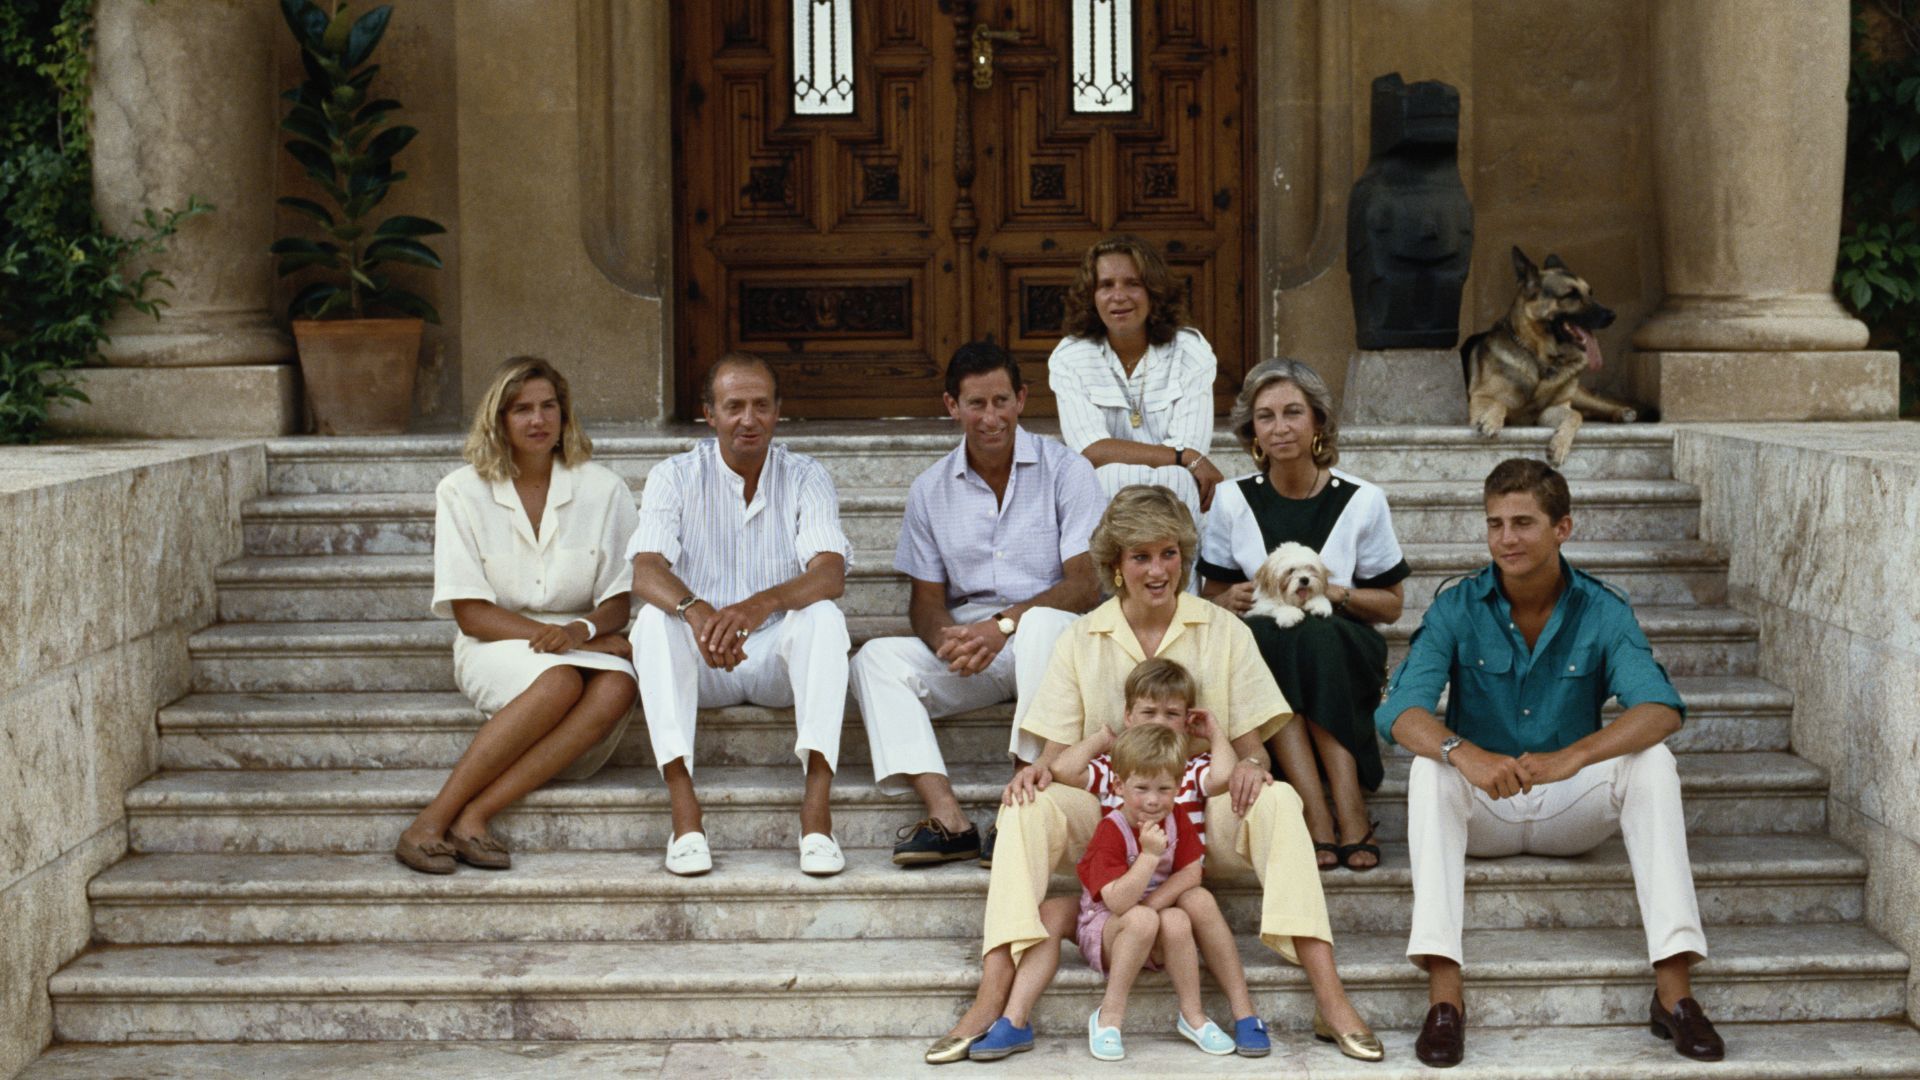 <p>                     With no shortage of incredible things to do in Mallorca, Diana relished spending time on the quaint Spanish Isle visiting numerous times over the years. Before she married the then Prince Charles she visited as a teenager with friends, then later with Charles and her two young sons, William and Harry. During this trip, the royals spent time with the Spanish royal family, King Juan Carlos I of Spain, his wife Queen Sofia, and their children, Elena, Cristina, and Felipe. Following her separation from Charles, Diana returned once more where she stayed at Hotel La Residencia in Deya, then owned by her close friend, Sir Richard Branson.                   </p>